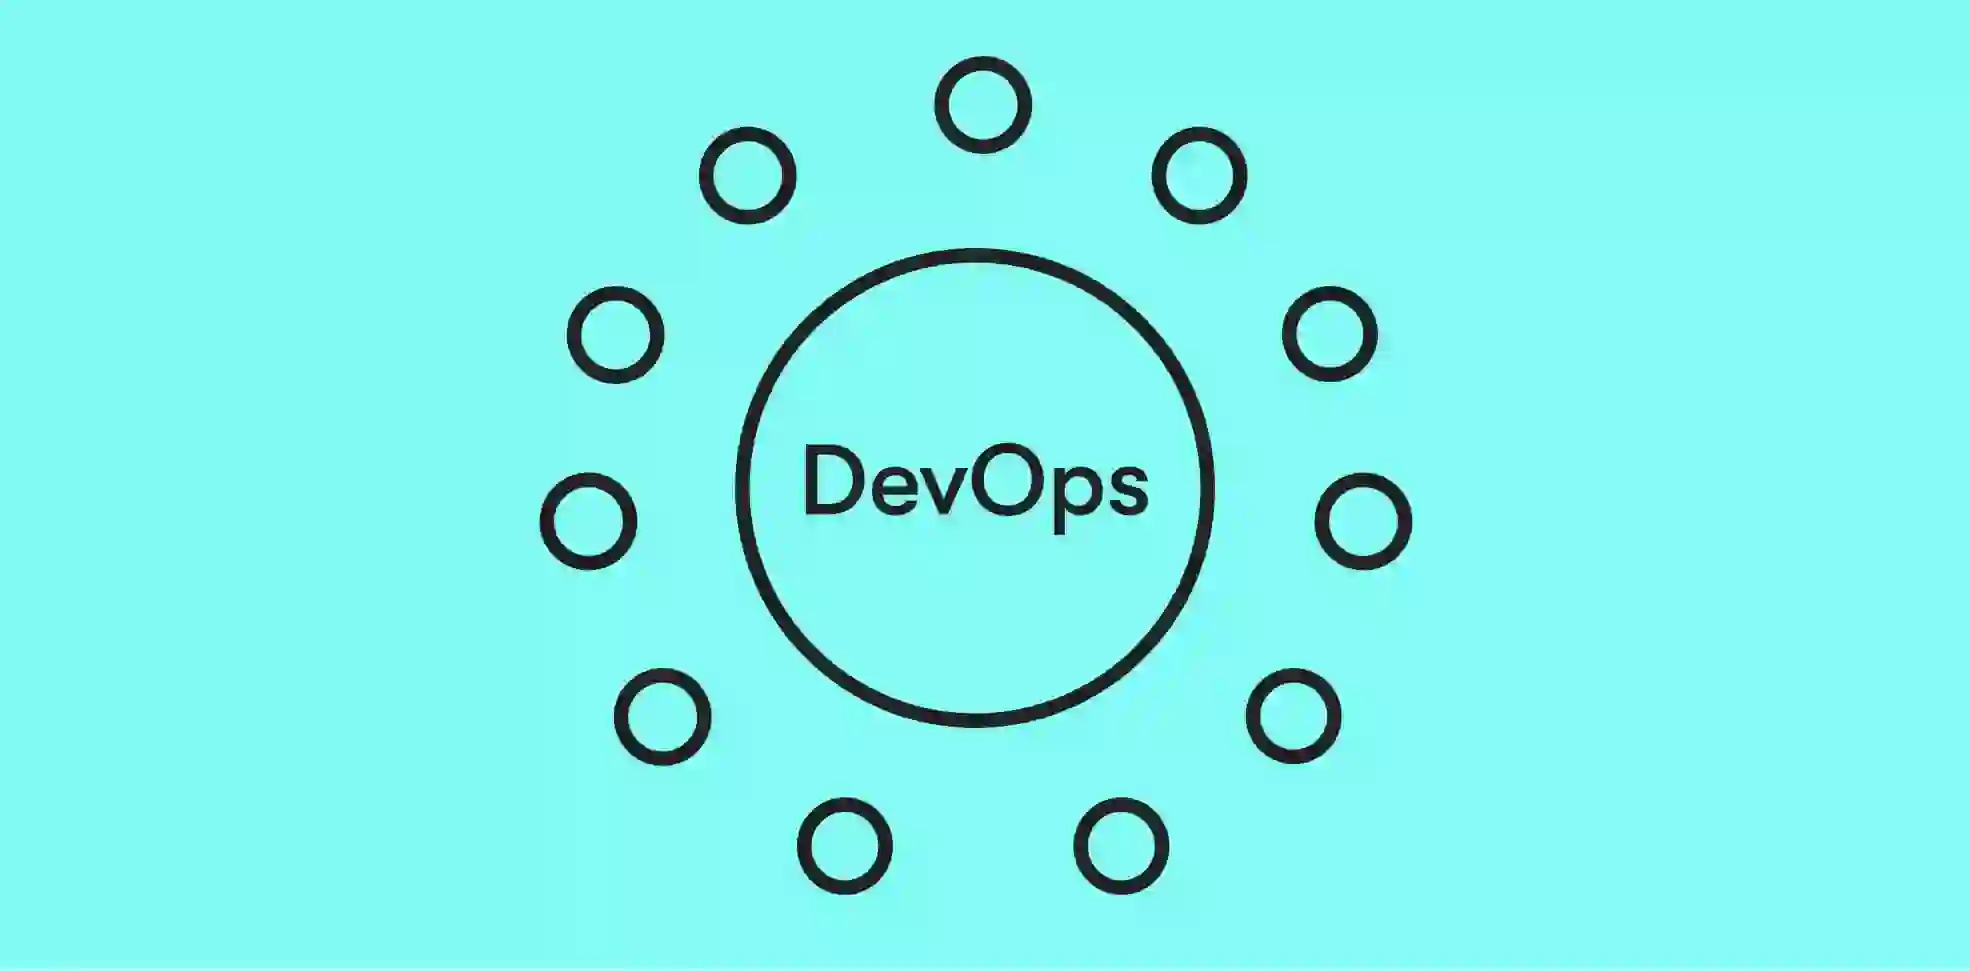 word devops in a circle on blue background